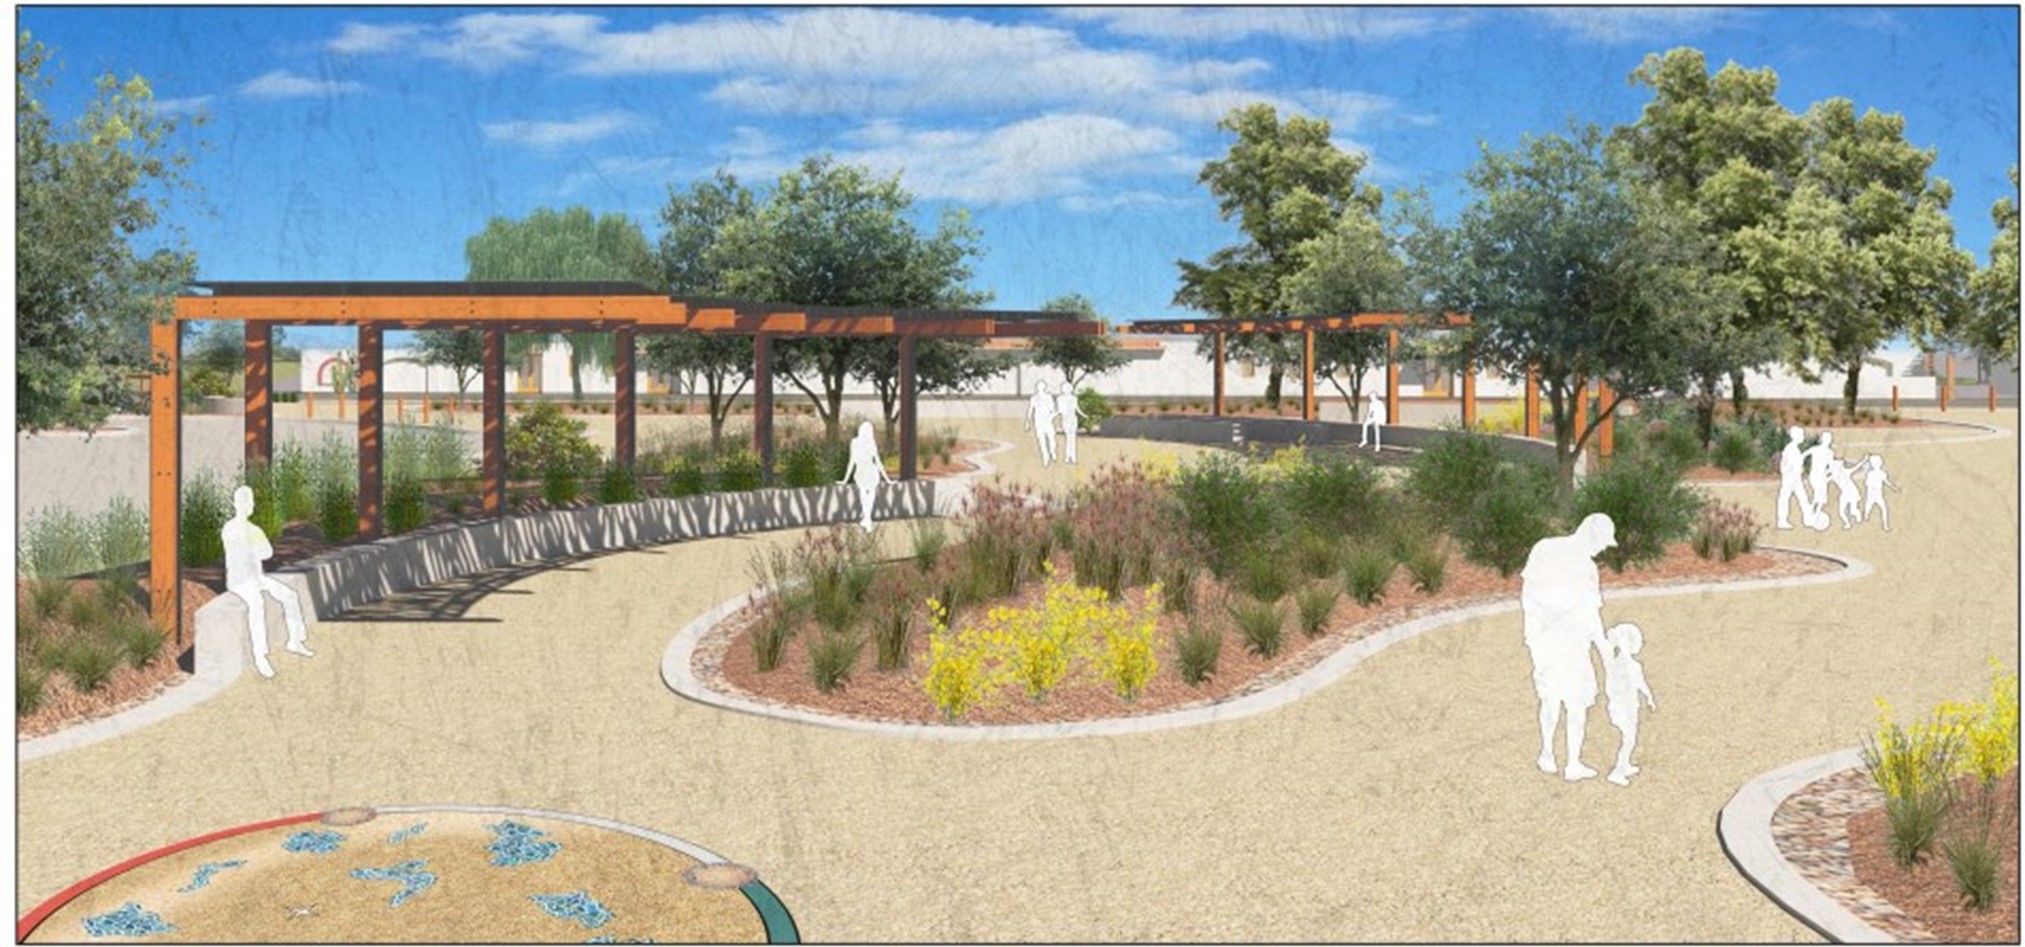 A rendering of what the area will look like when it is completed.